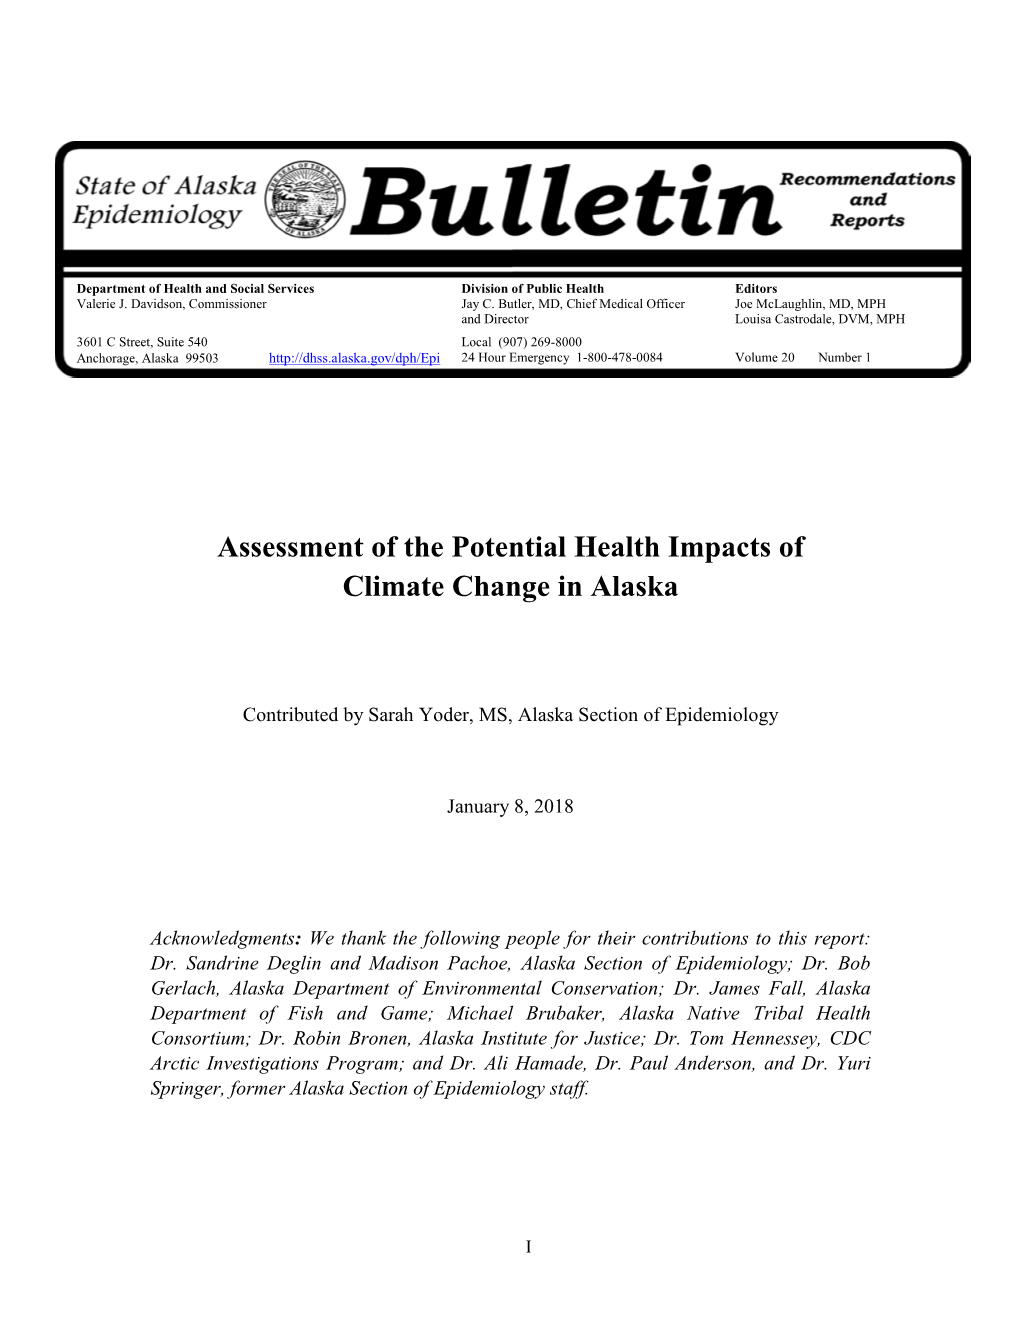 Assessment of the Potential Health Impacts of Climate Change in Alaska